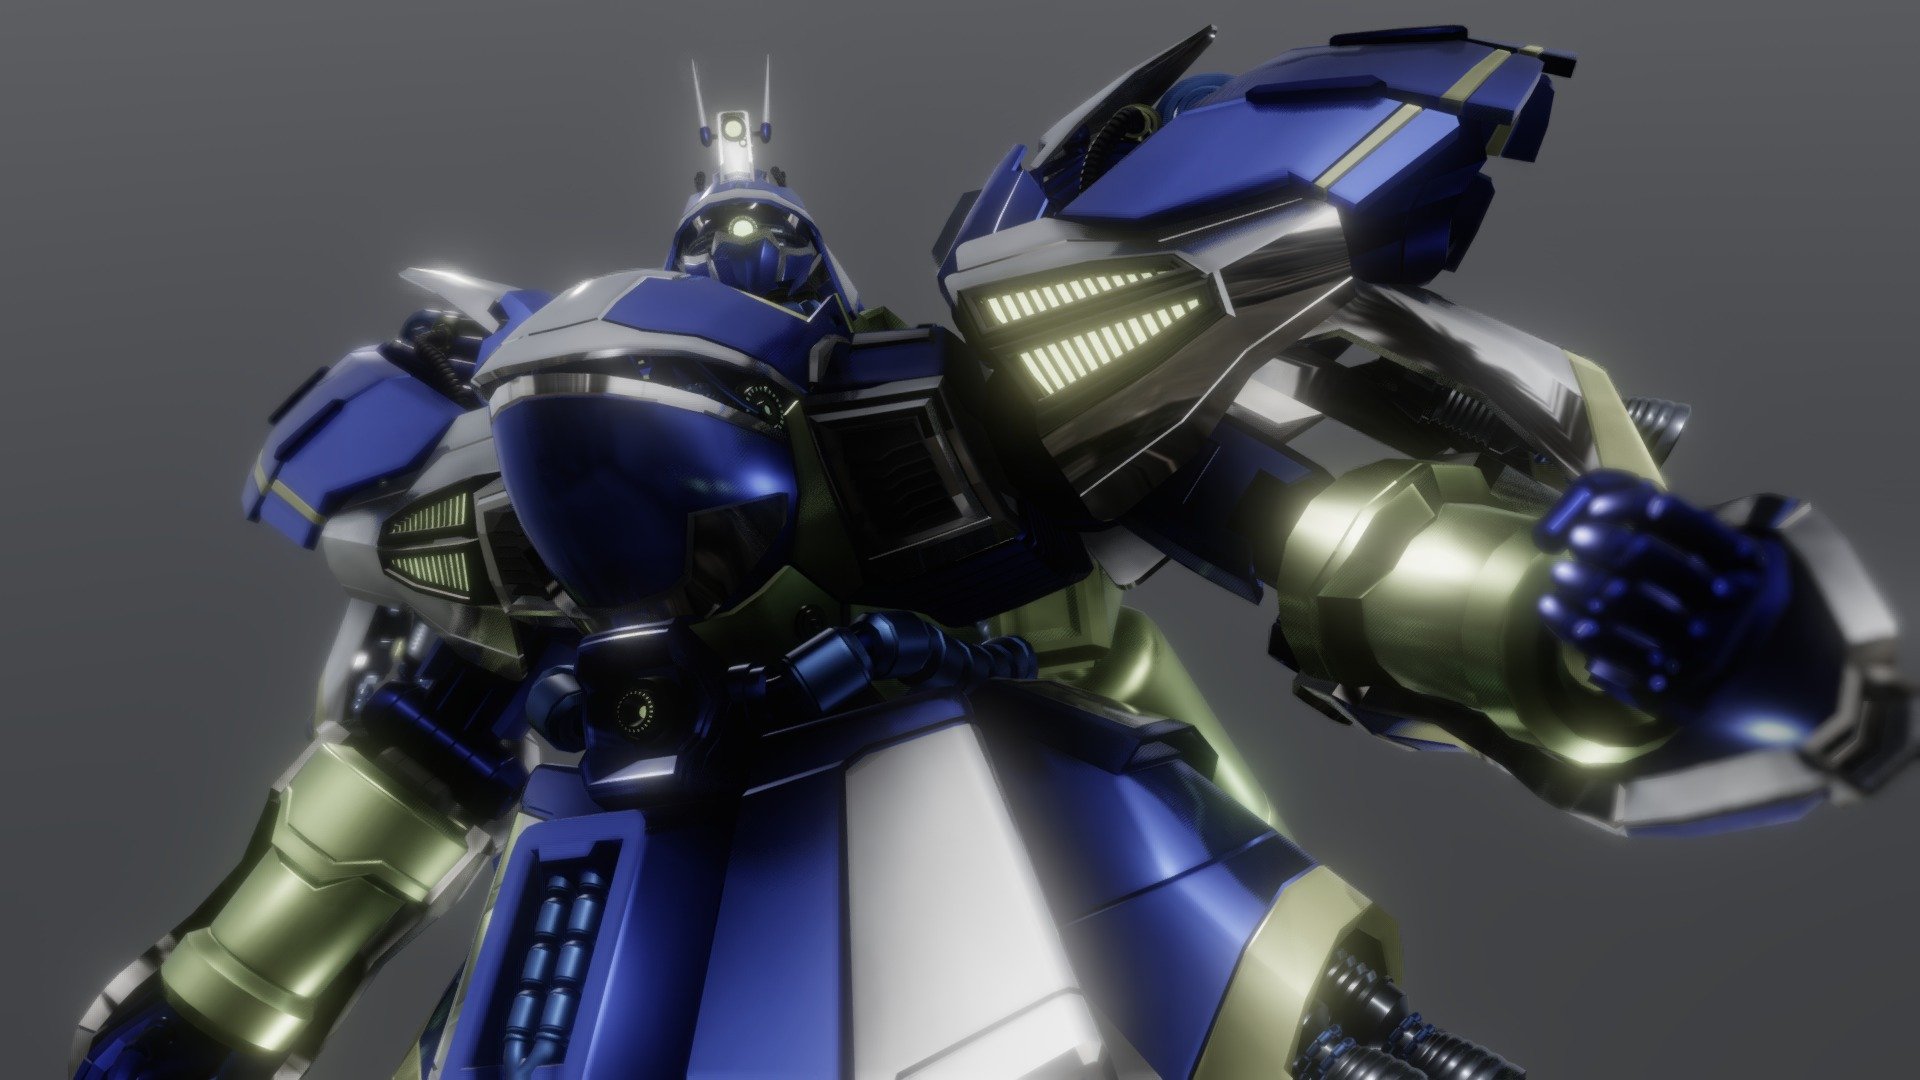 Quick entry for the &lsquo;'Sketchfab 3D Editor Challenge: SAZABI MSN-04'&lsquo;. Hope you like it!

Adjusted to look elegant but at same time still representing an imposing figure of a Guard or the like. . .

The main body colors and emission colors have been changed.
For post processing, I adjusted: Screen Space Reflections, SSAO, Depth of Field, Bloom, and Color Balance 3d model